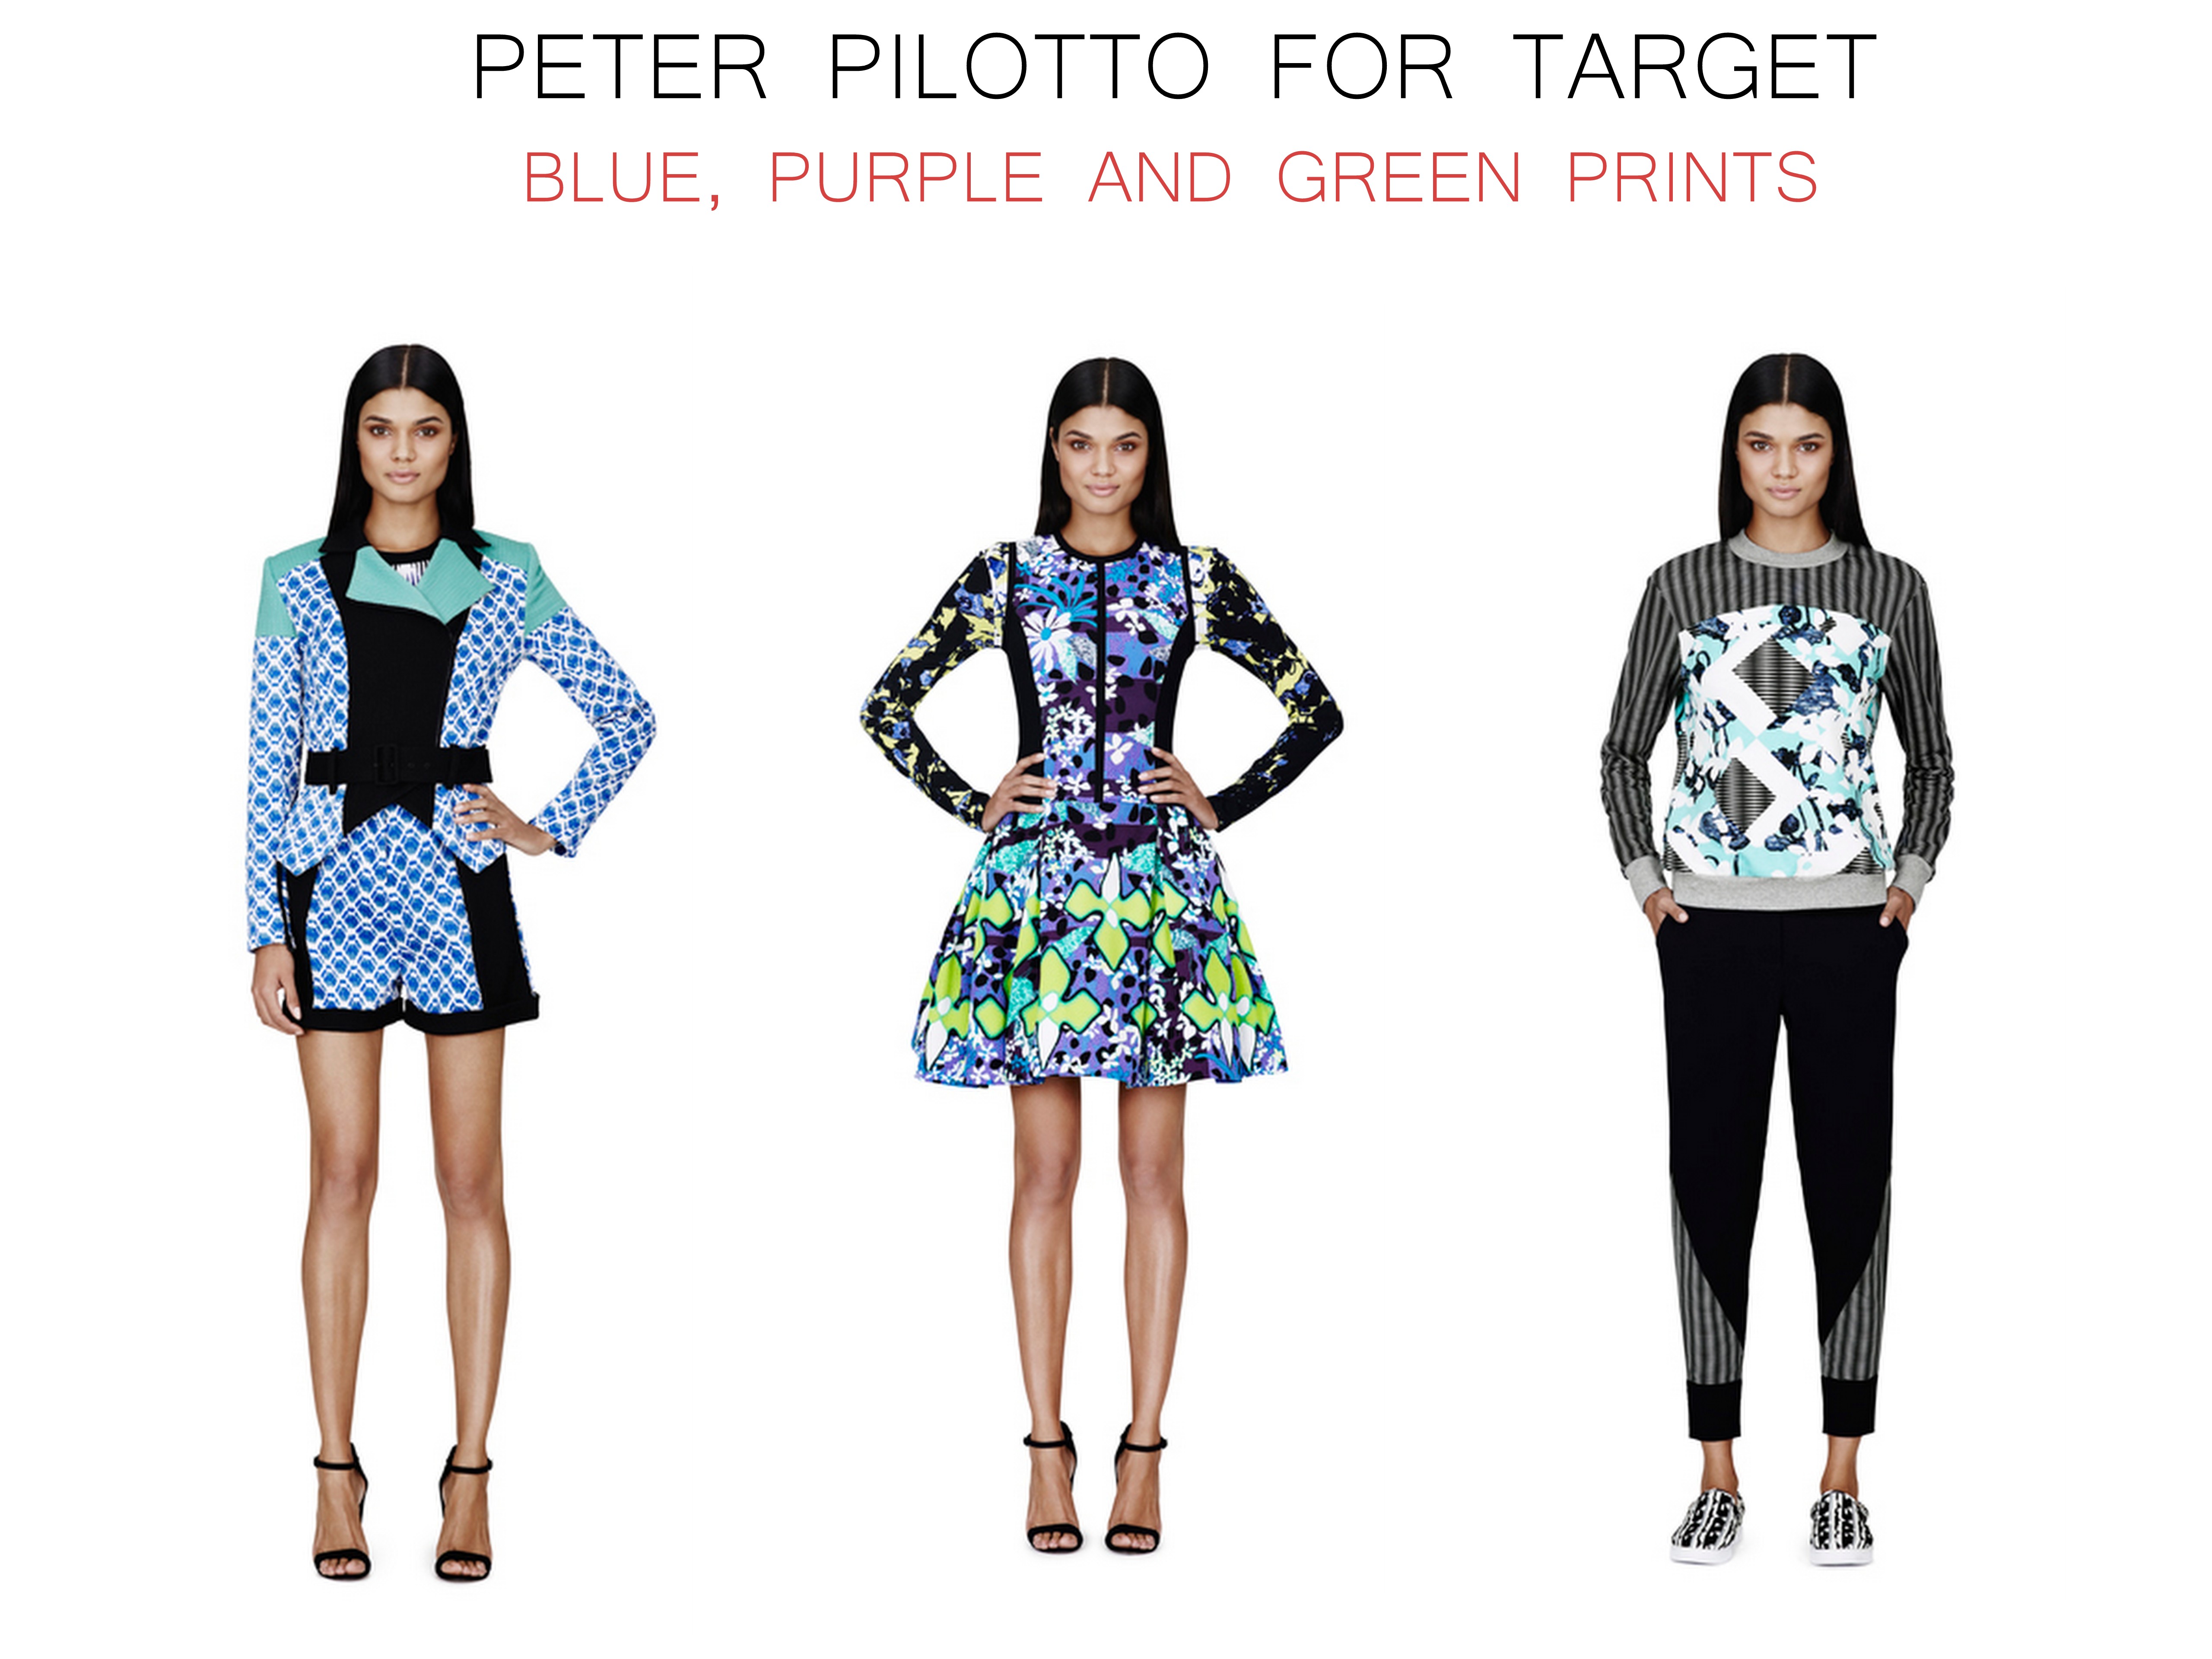 Peter Pilotto for Target blue, purple, and green prints - saved by Chic n Cheap Living